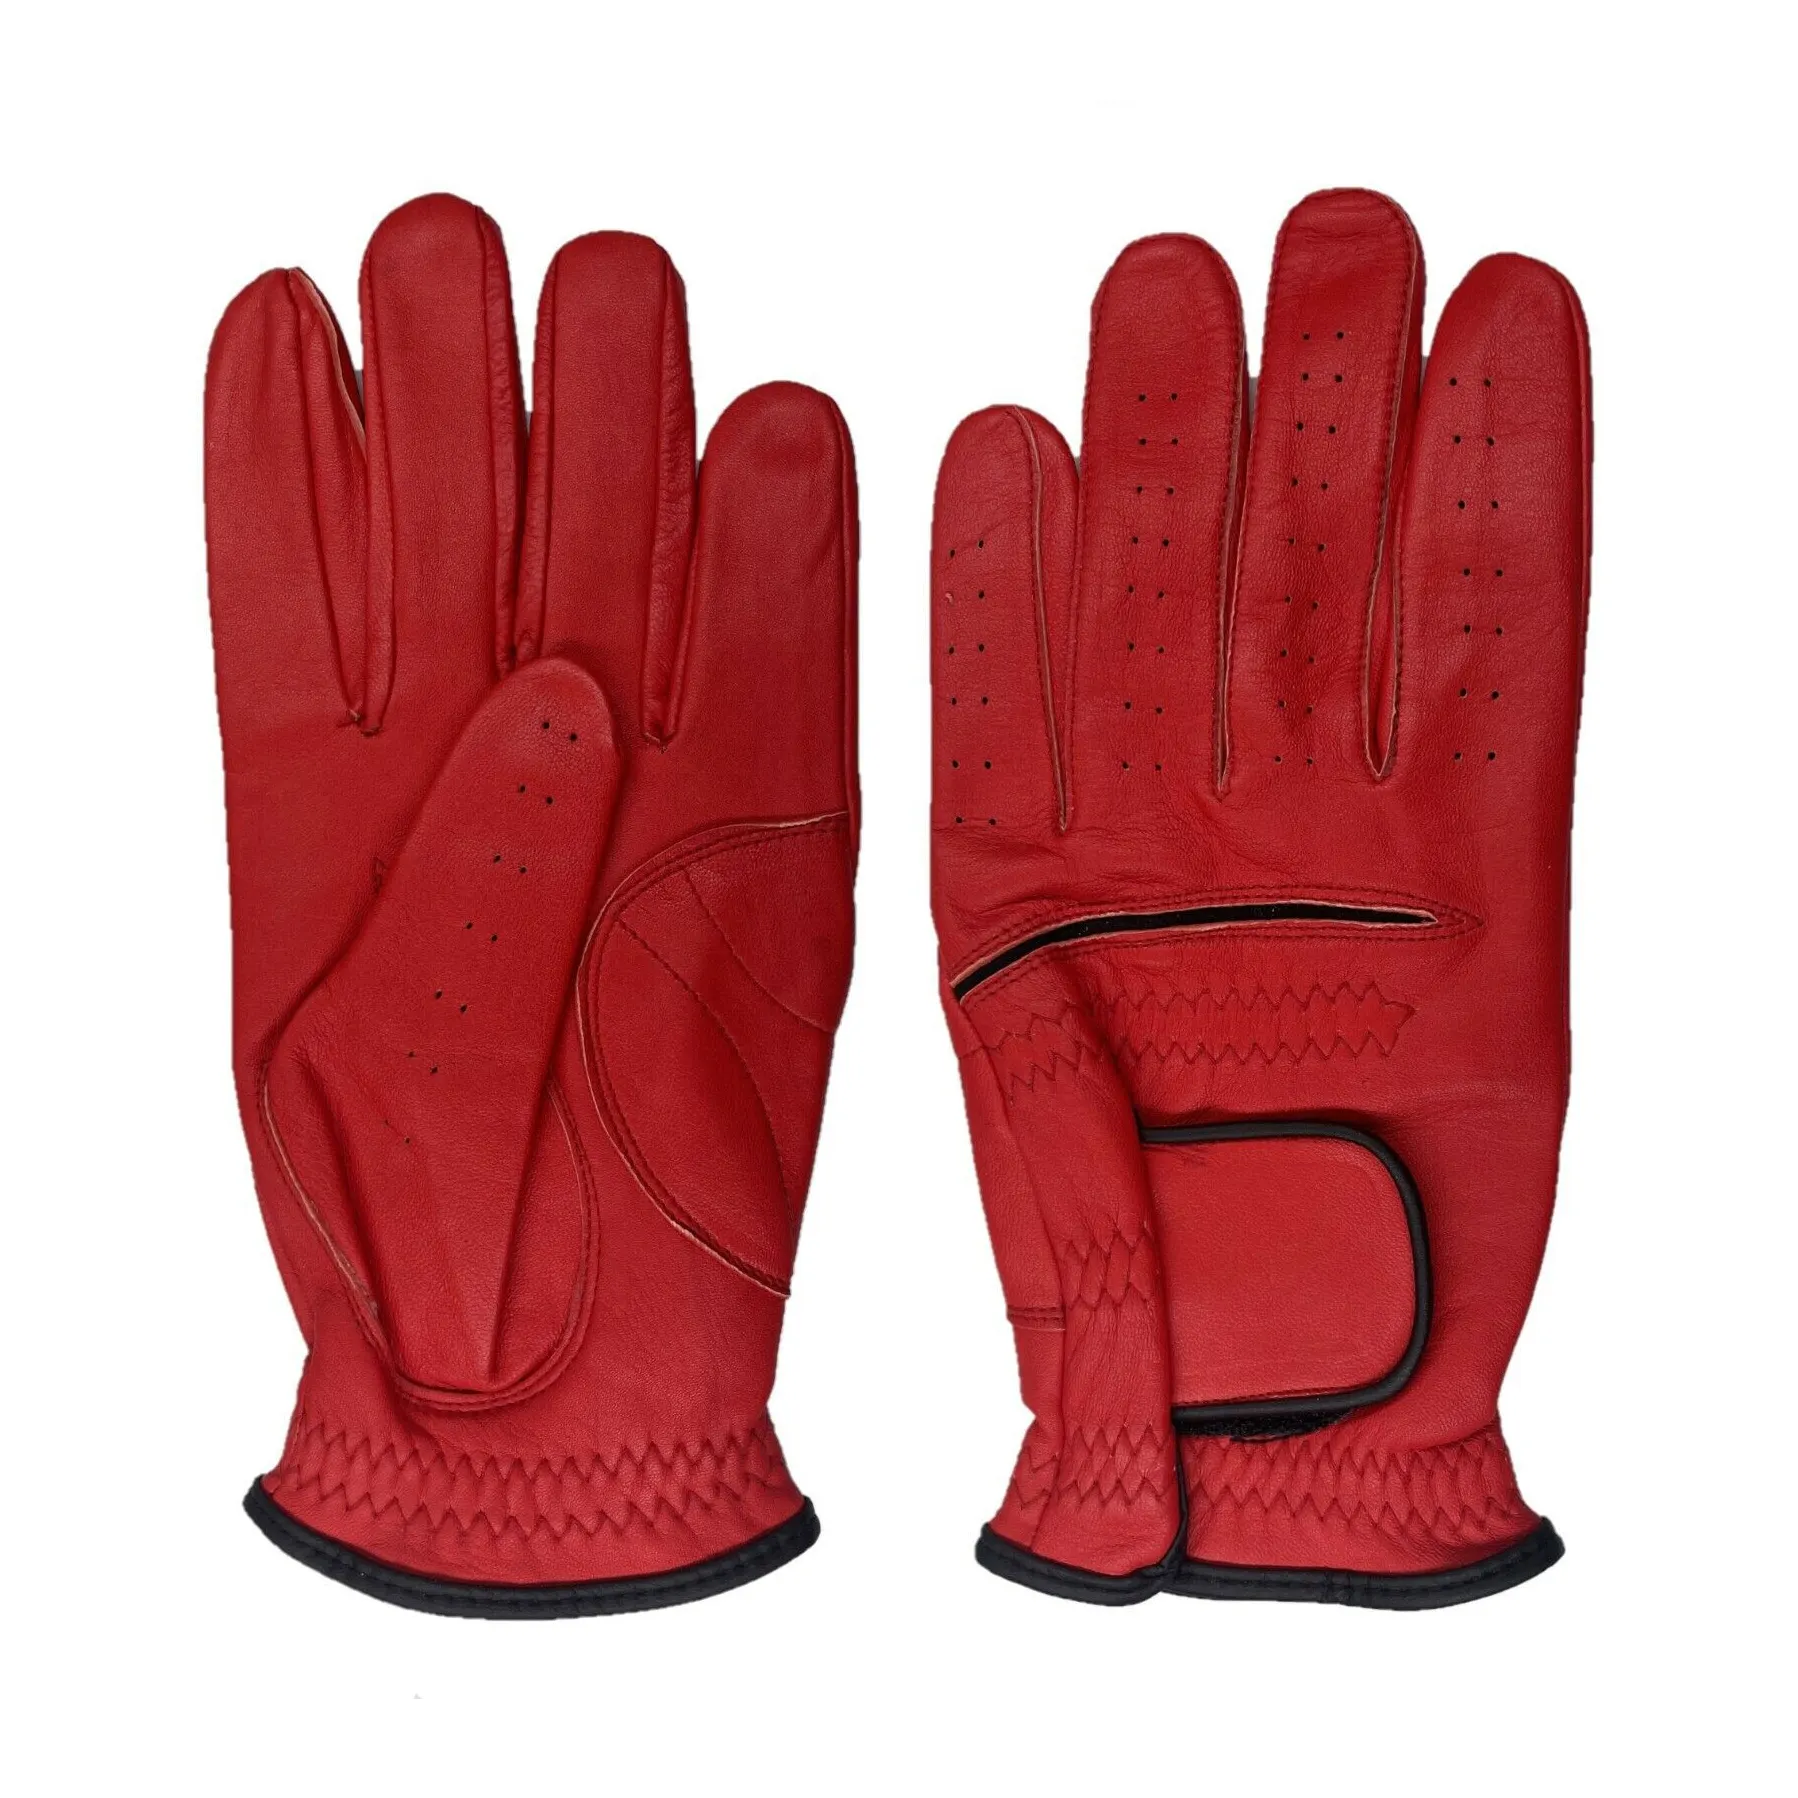 Experience Unparalleled Comfort And Style With Men's Left Hand Cabretta Leather Golf Gloves Diverse Colors Available